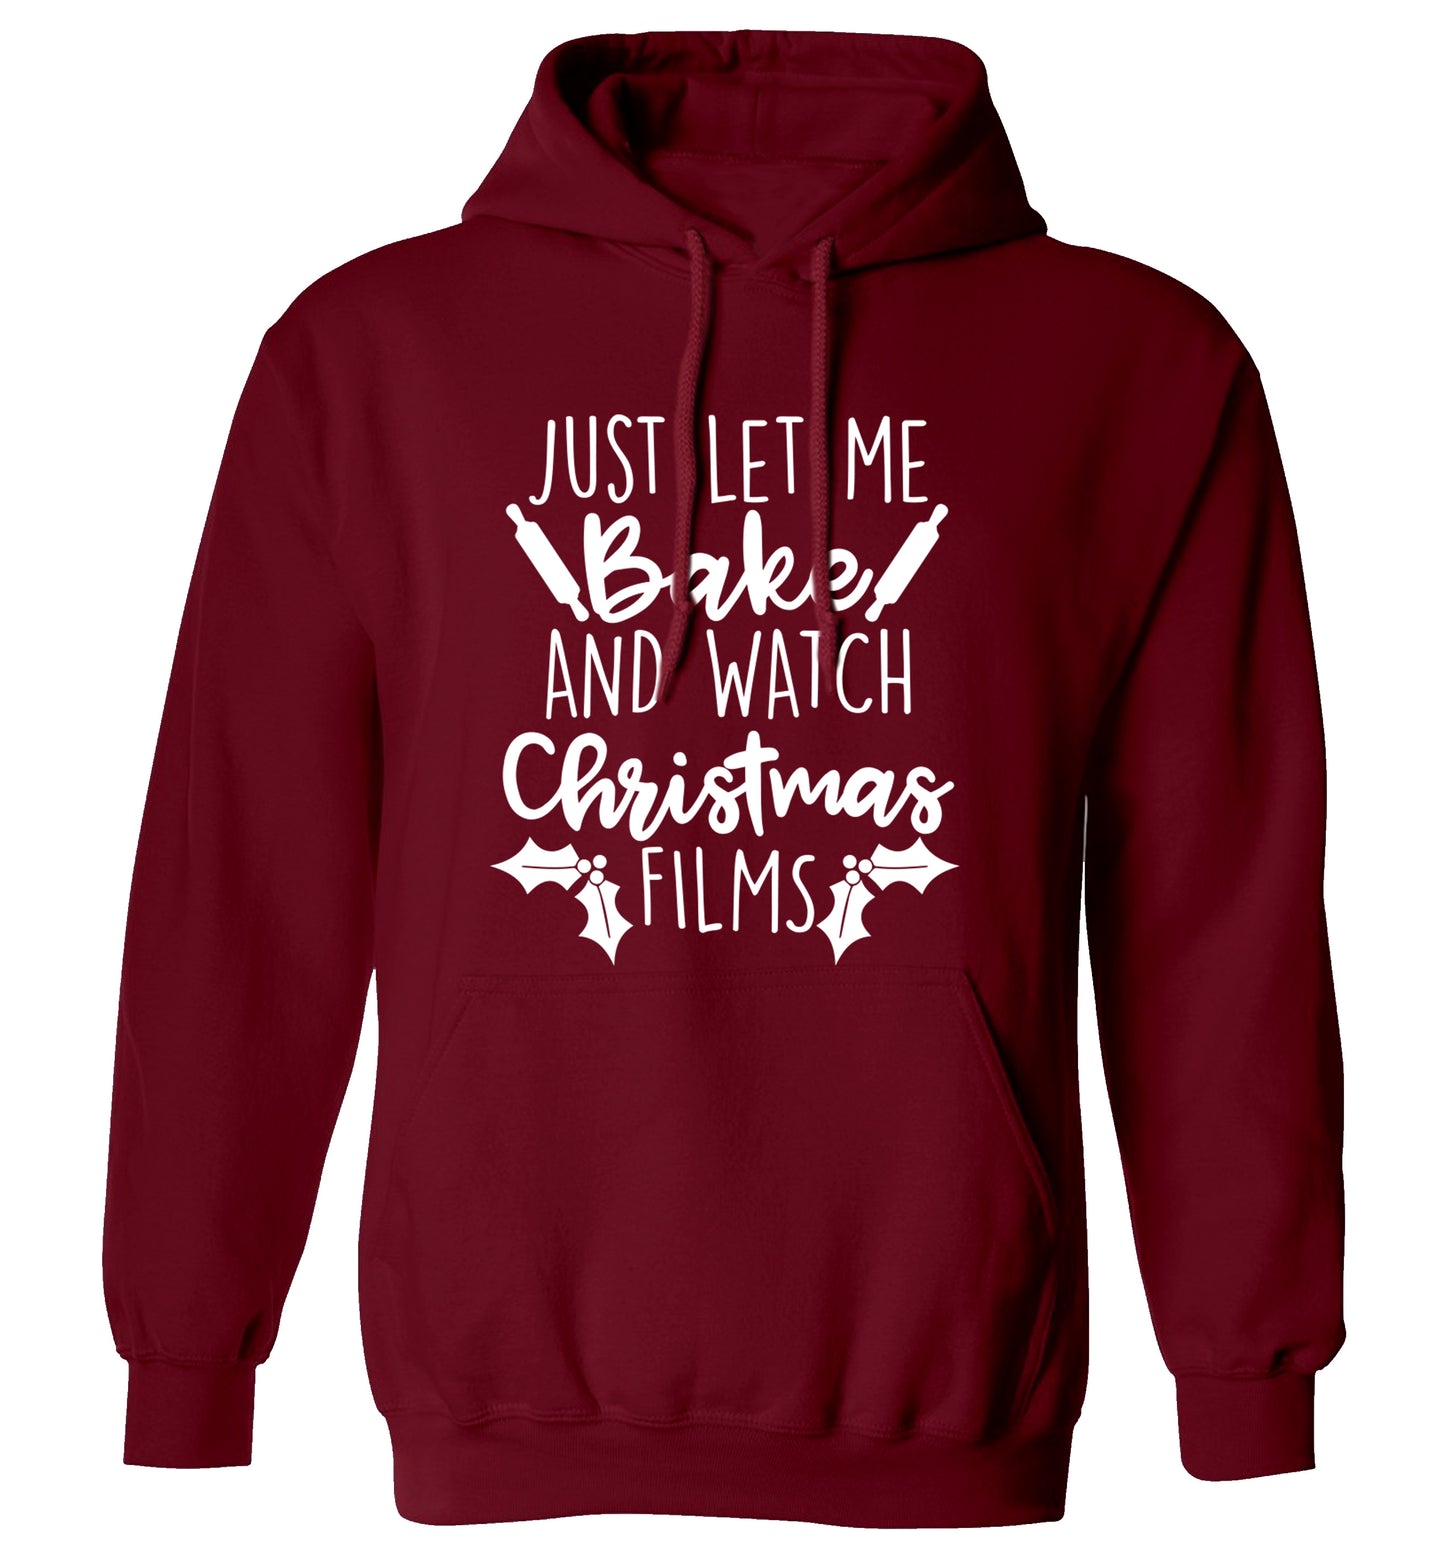 Just let me bake and watch Christmas films adults unisex maroon hoodie 2XL